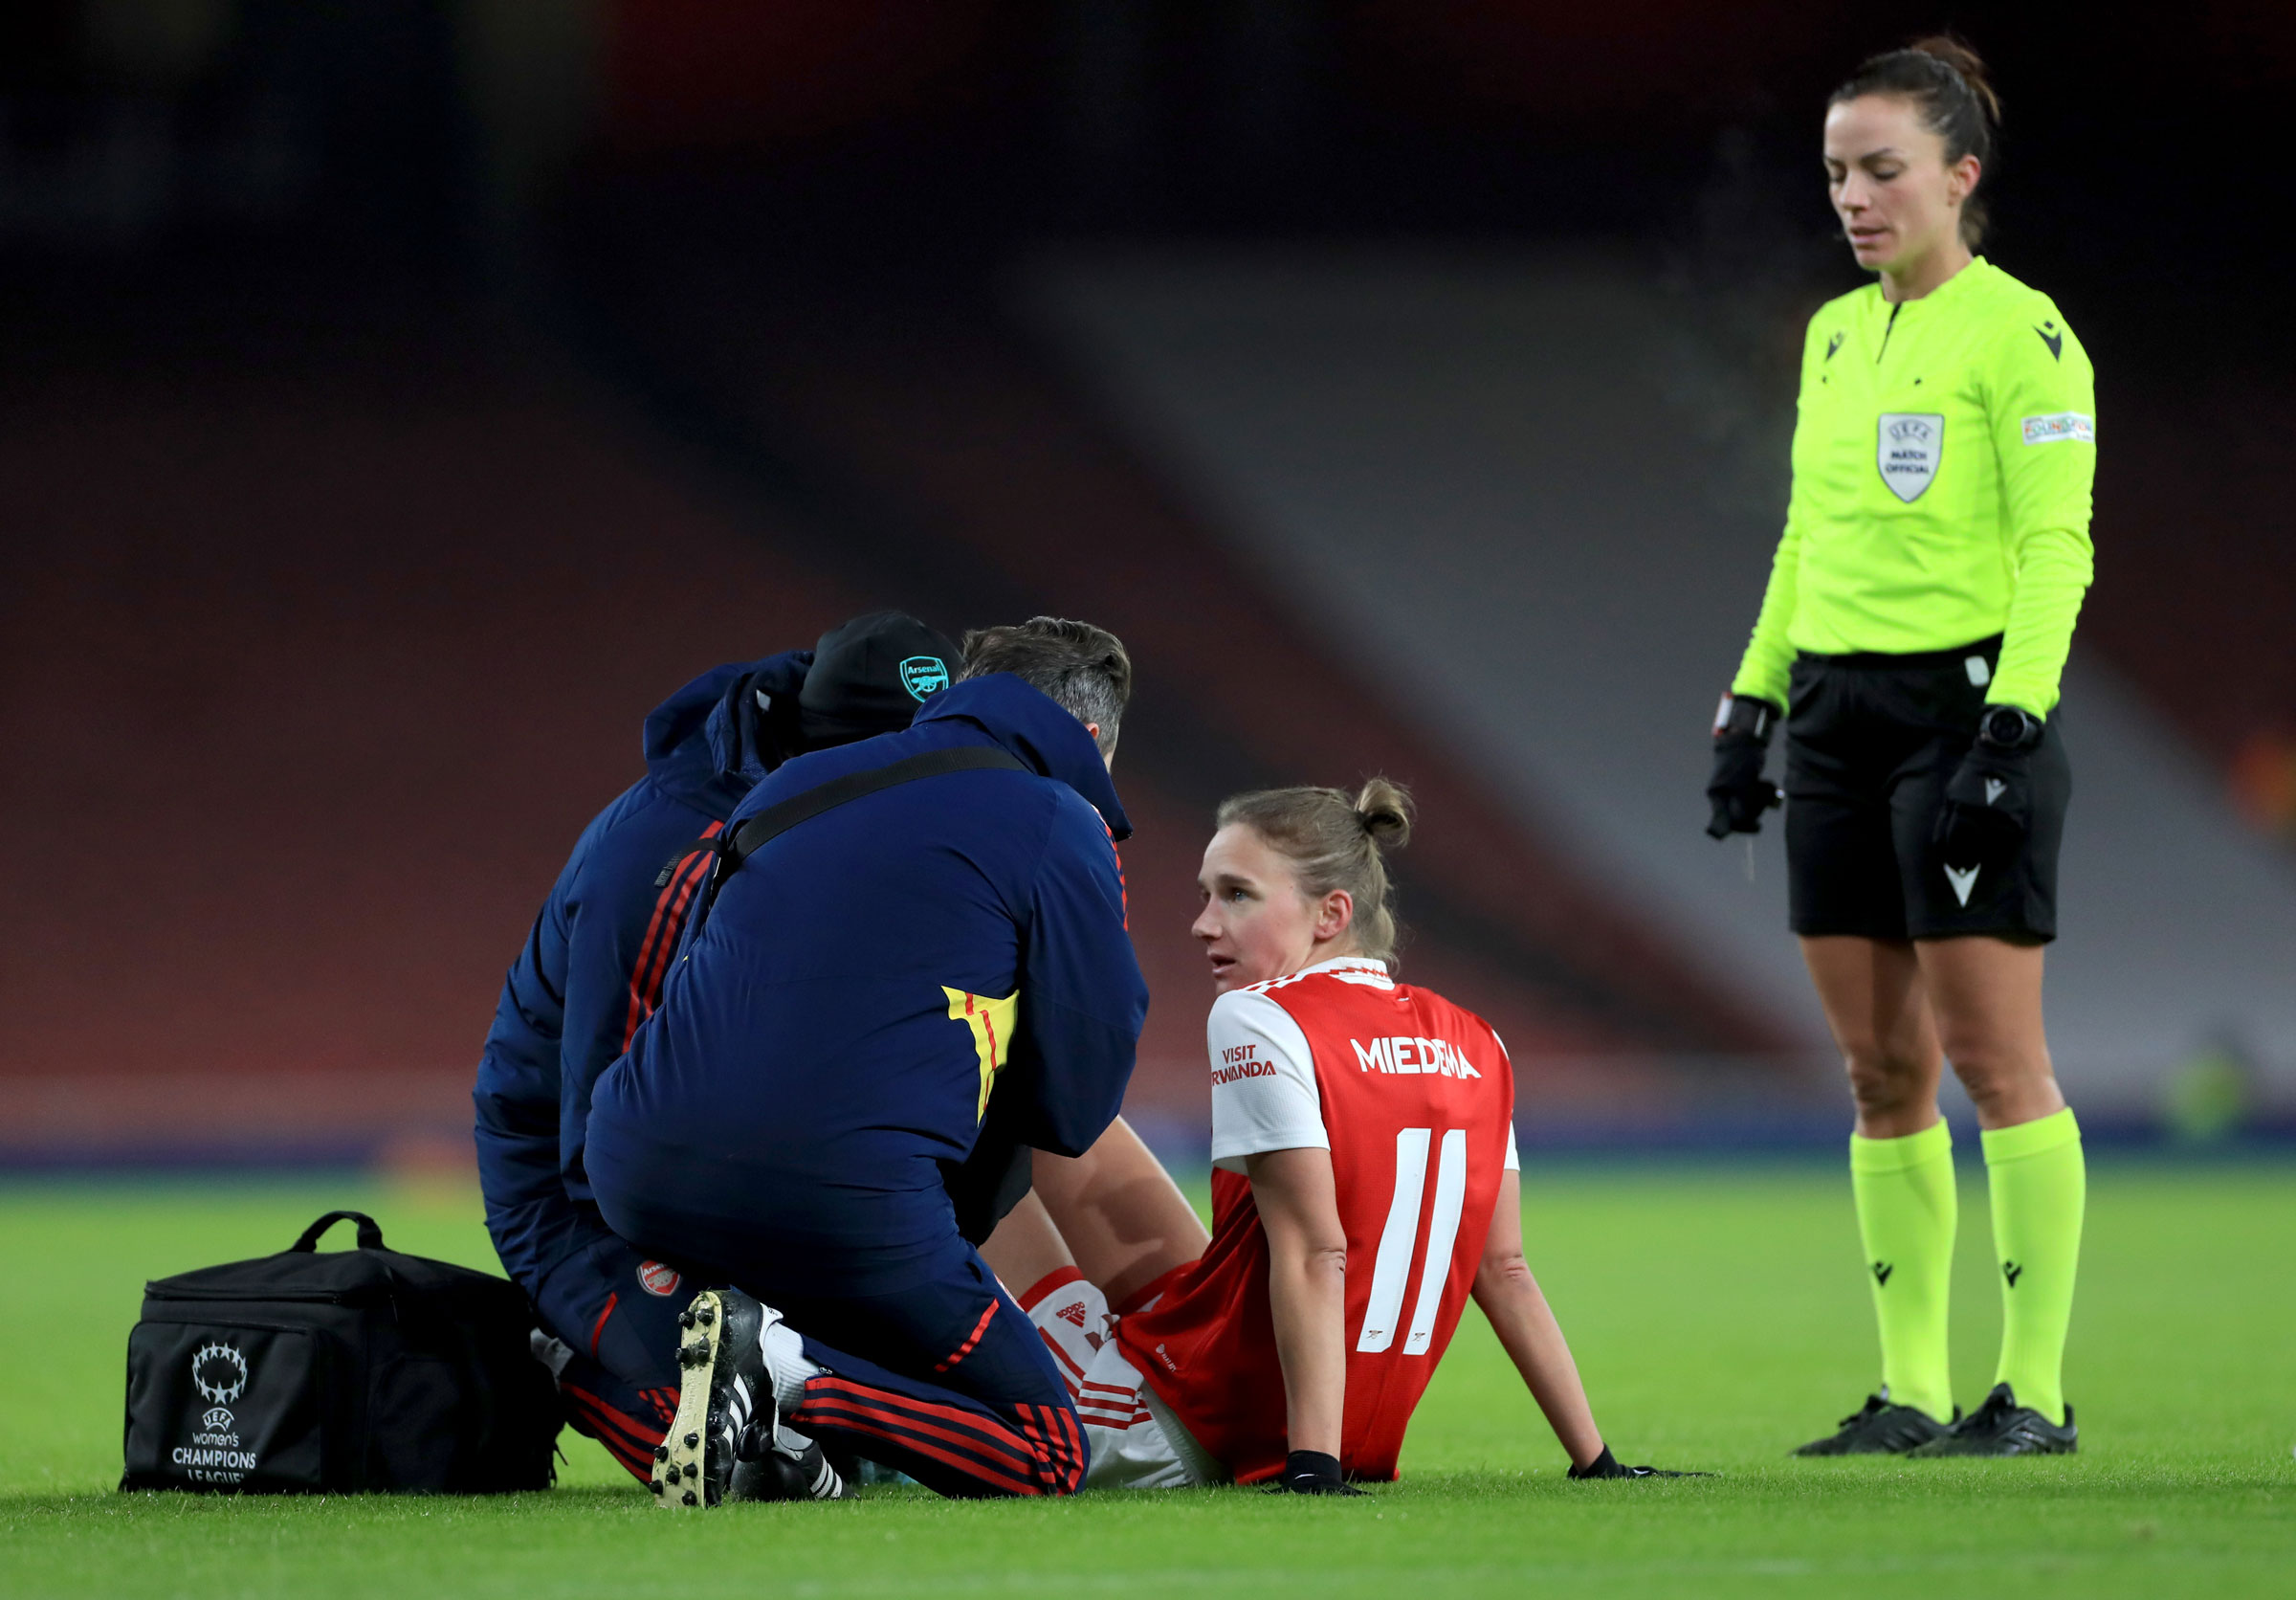 Vivianne Miedema receives medical attention during a UEFA Women’s Champions League match at the Emirates Stadium in London on Dec. 15, 2022. Miedema will miss the Women’s World Cup for the Netherlands due to the ACL injury sustained late last year. (Bradley Collyer—PA Images/Getty Images)